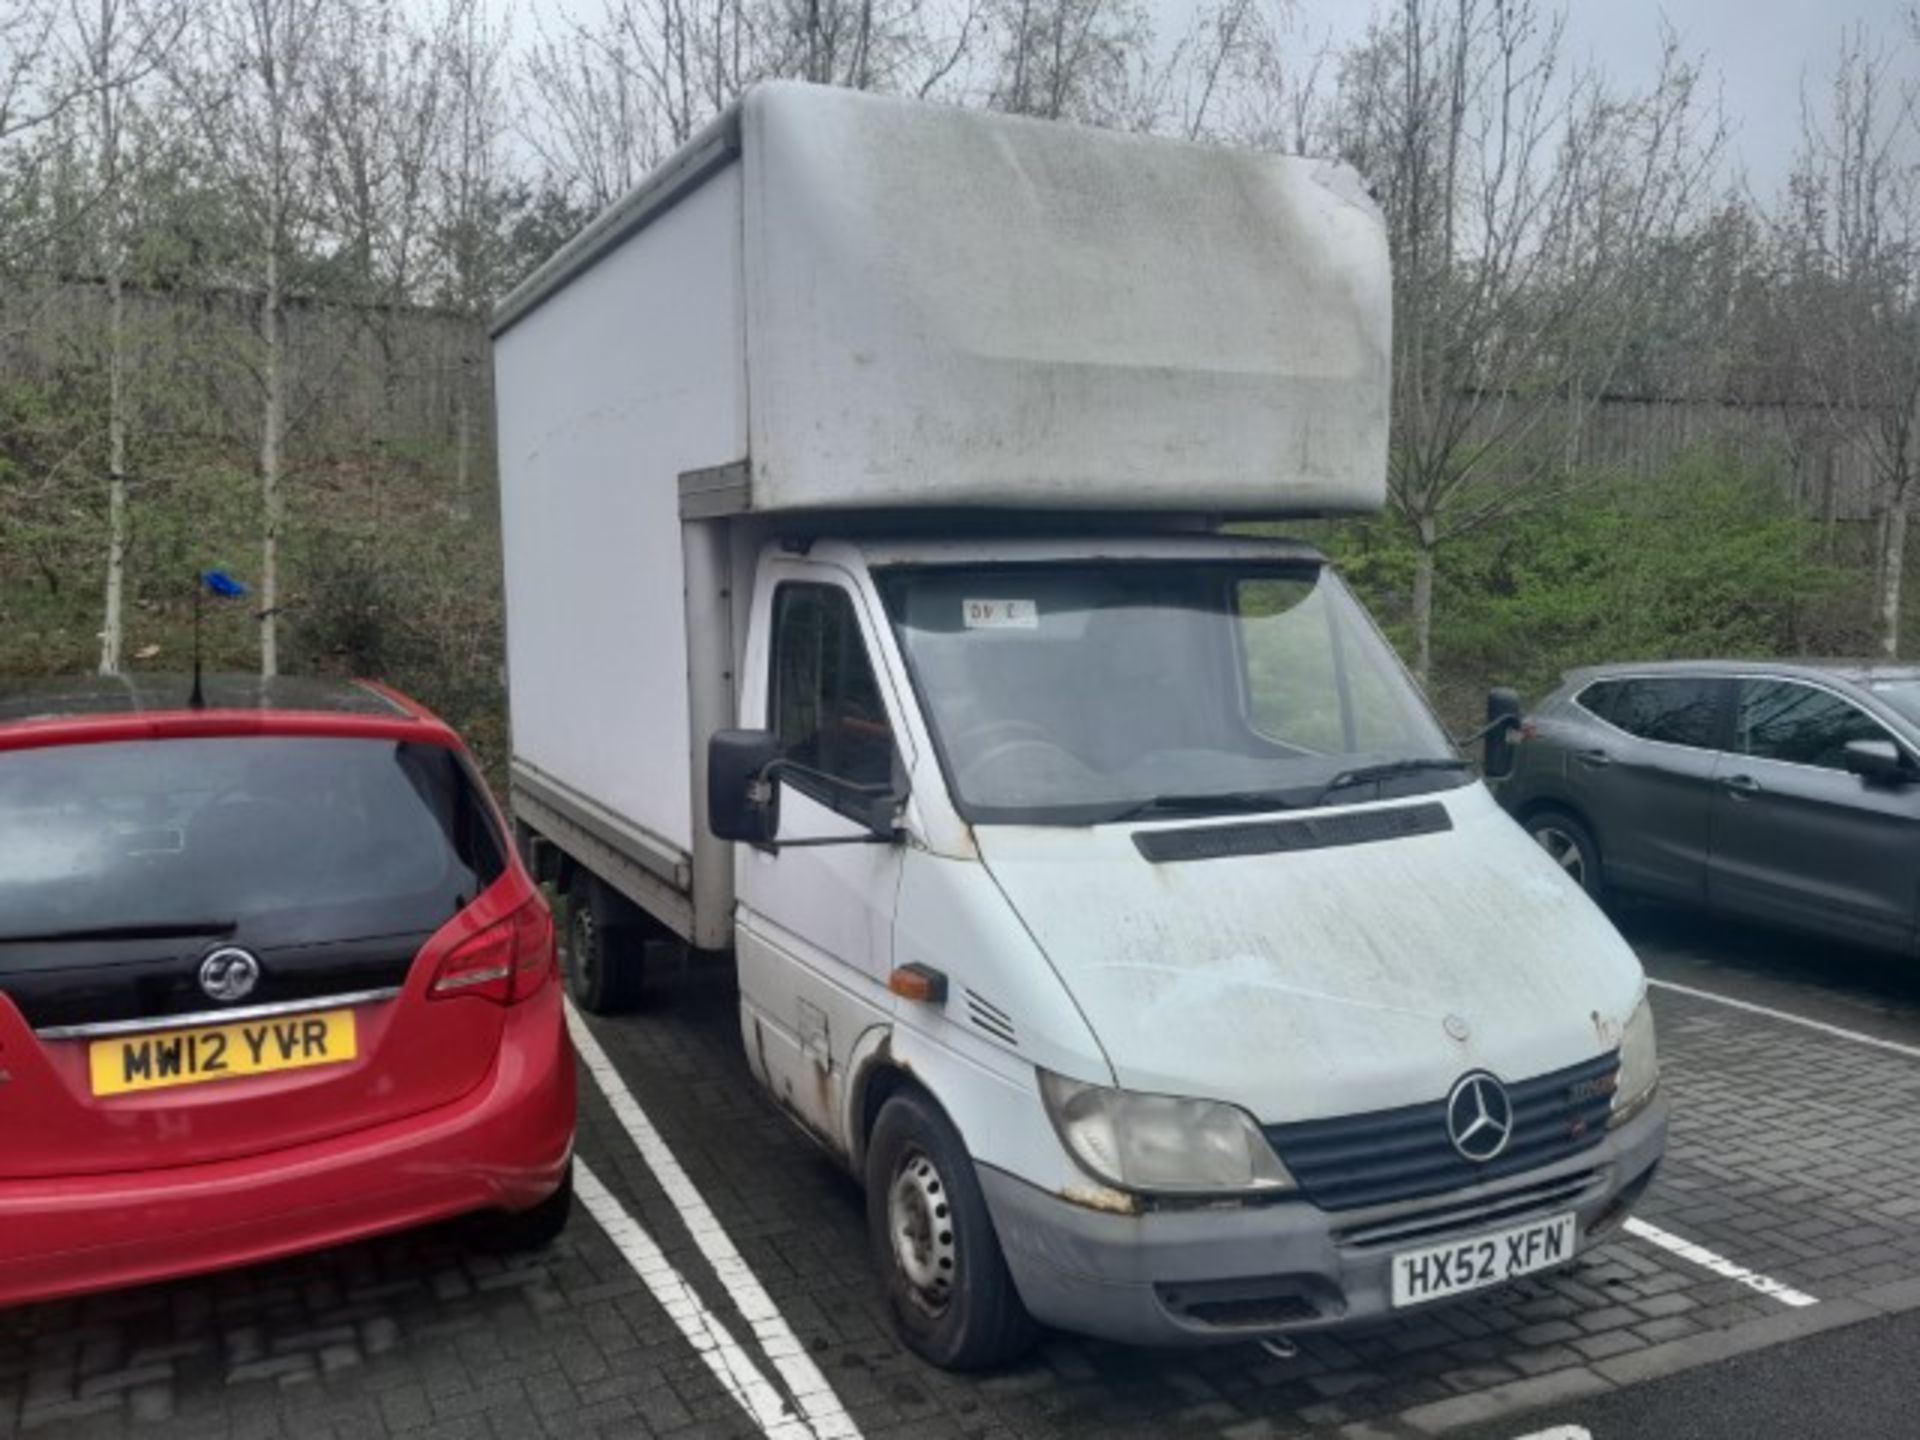 Mercedes Sprinter 311 CDI MWB Van with tail lift, Registration Number HX52 XFN, c 275,000 miles - Image 2 of 8